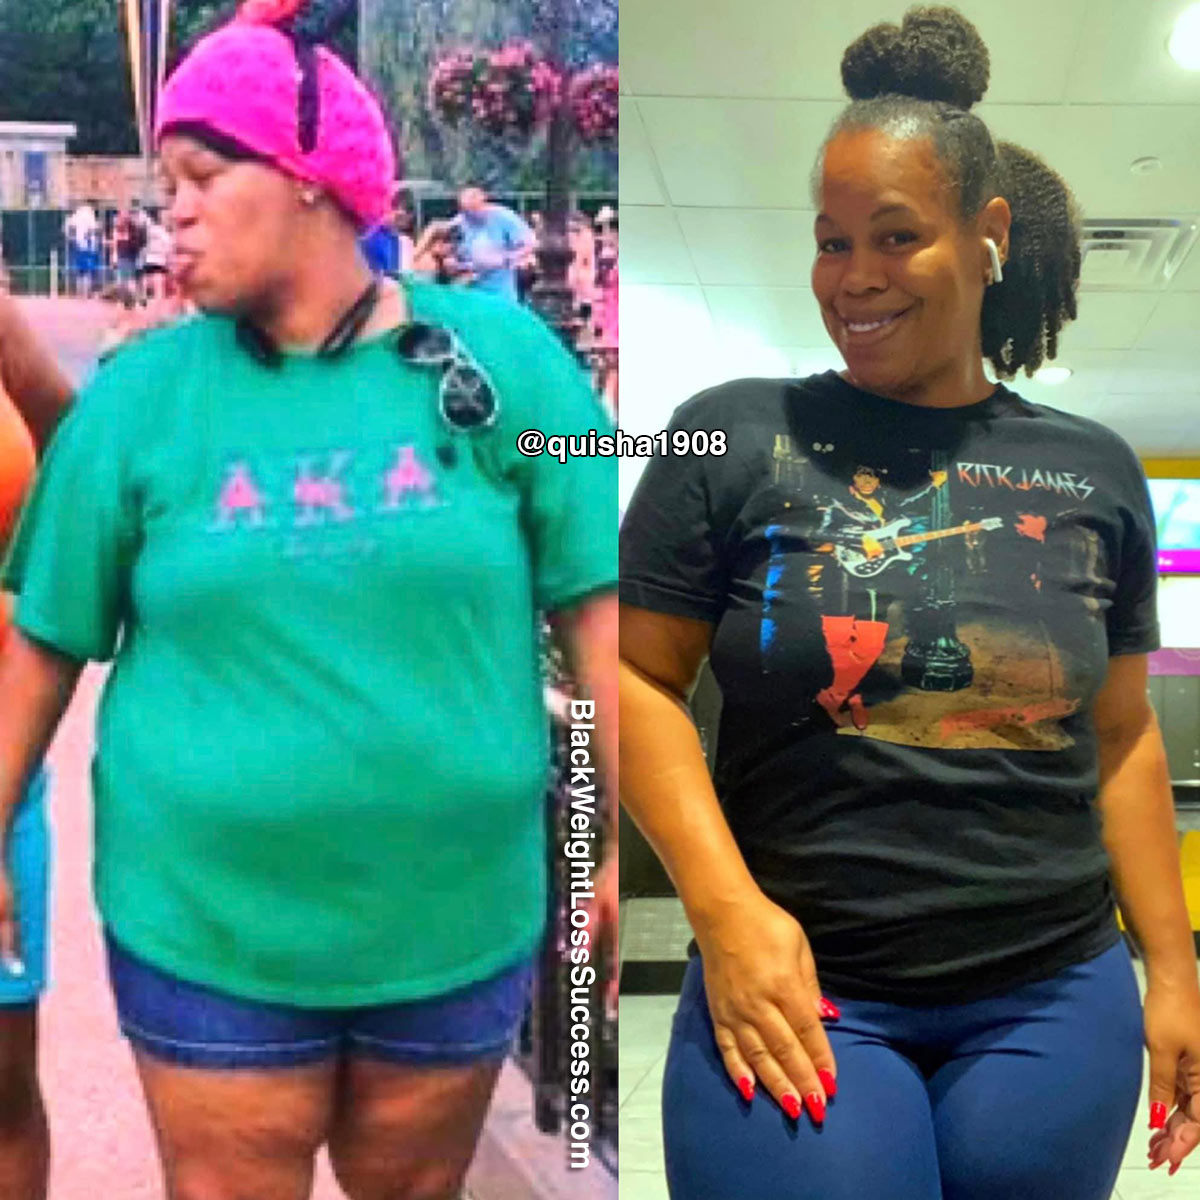 LaQuisha before and after weight loss